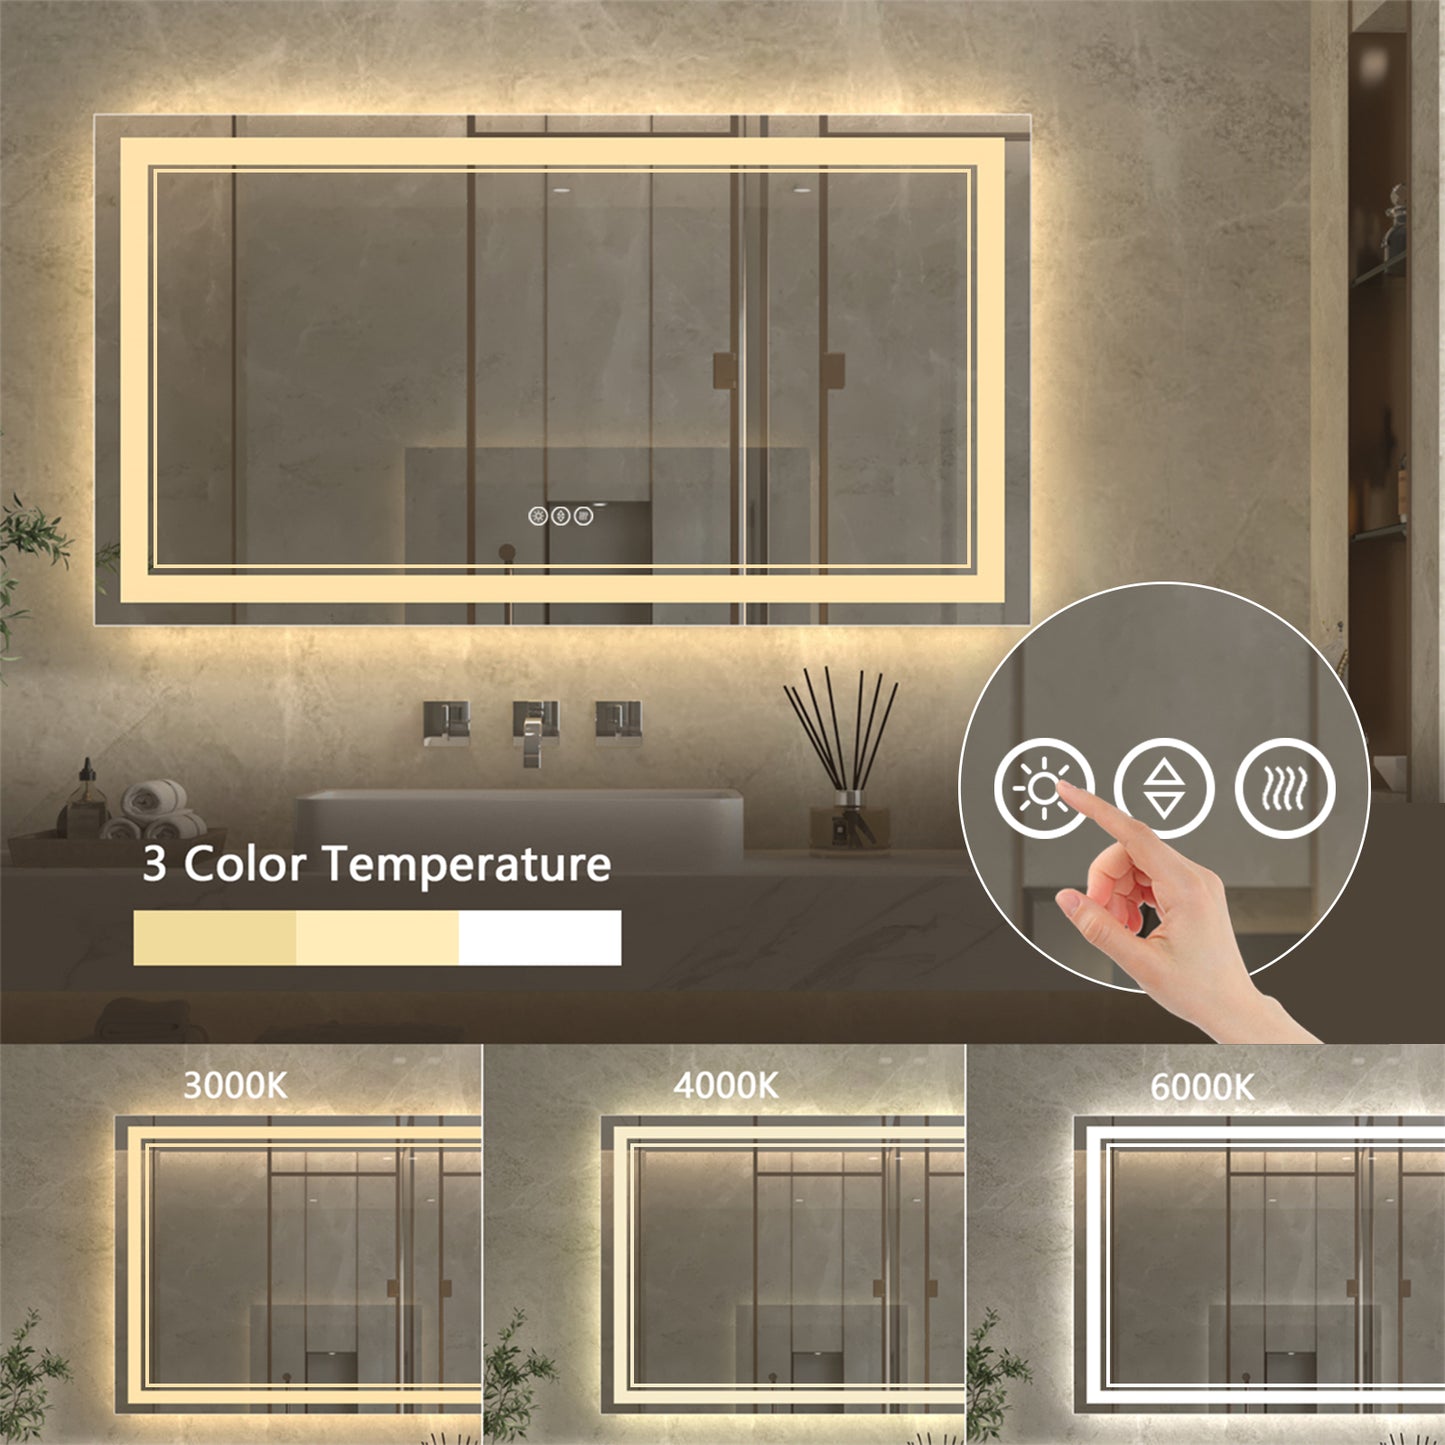 Linea 55" W x 30" H LED Heated Bathroom Mirror,Anti Fog,Dimmable,Front-Lighted and Backlit, Tempered Glass